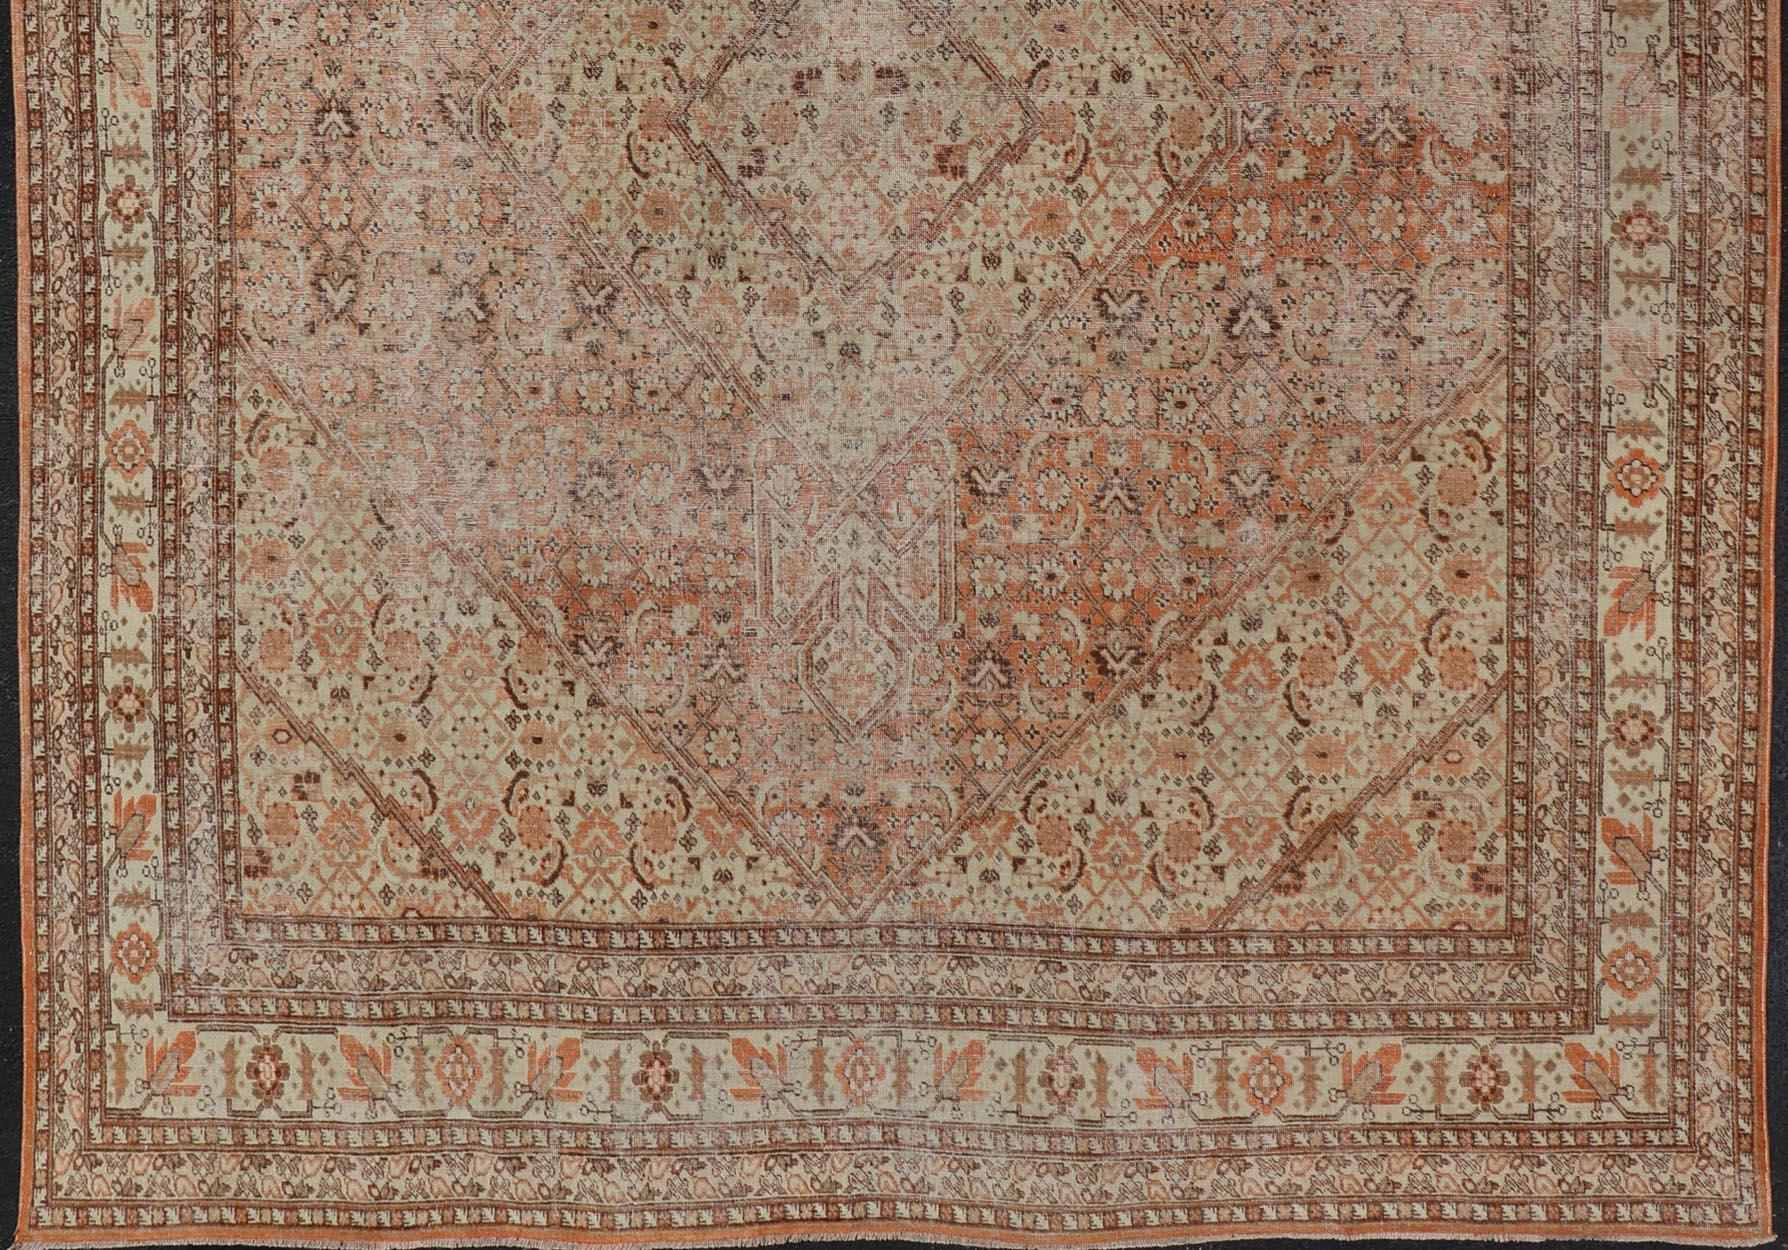 Antique Persian Tabriz with All-Over Medallion Design in Orange and Browns In Good Condition For Sale In Atlanta, GA